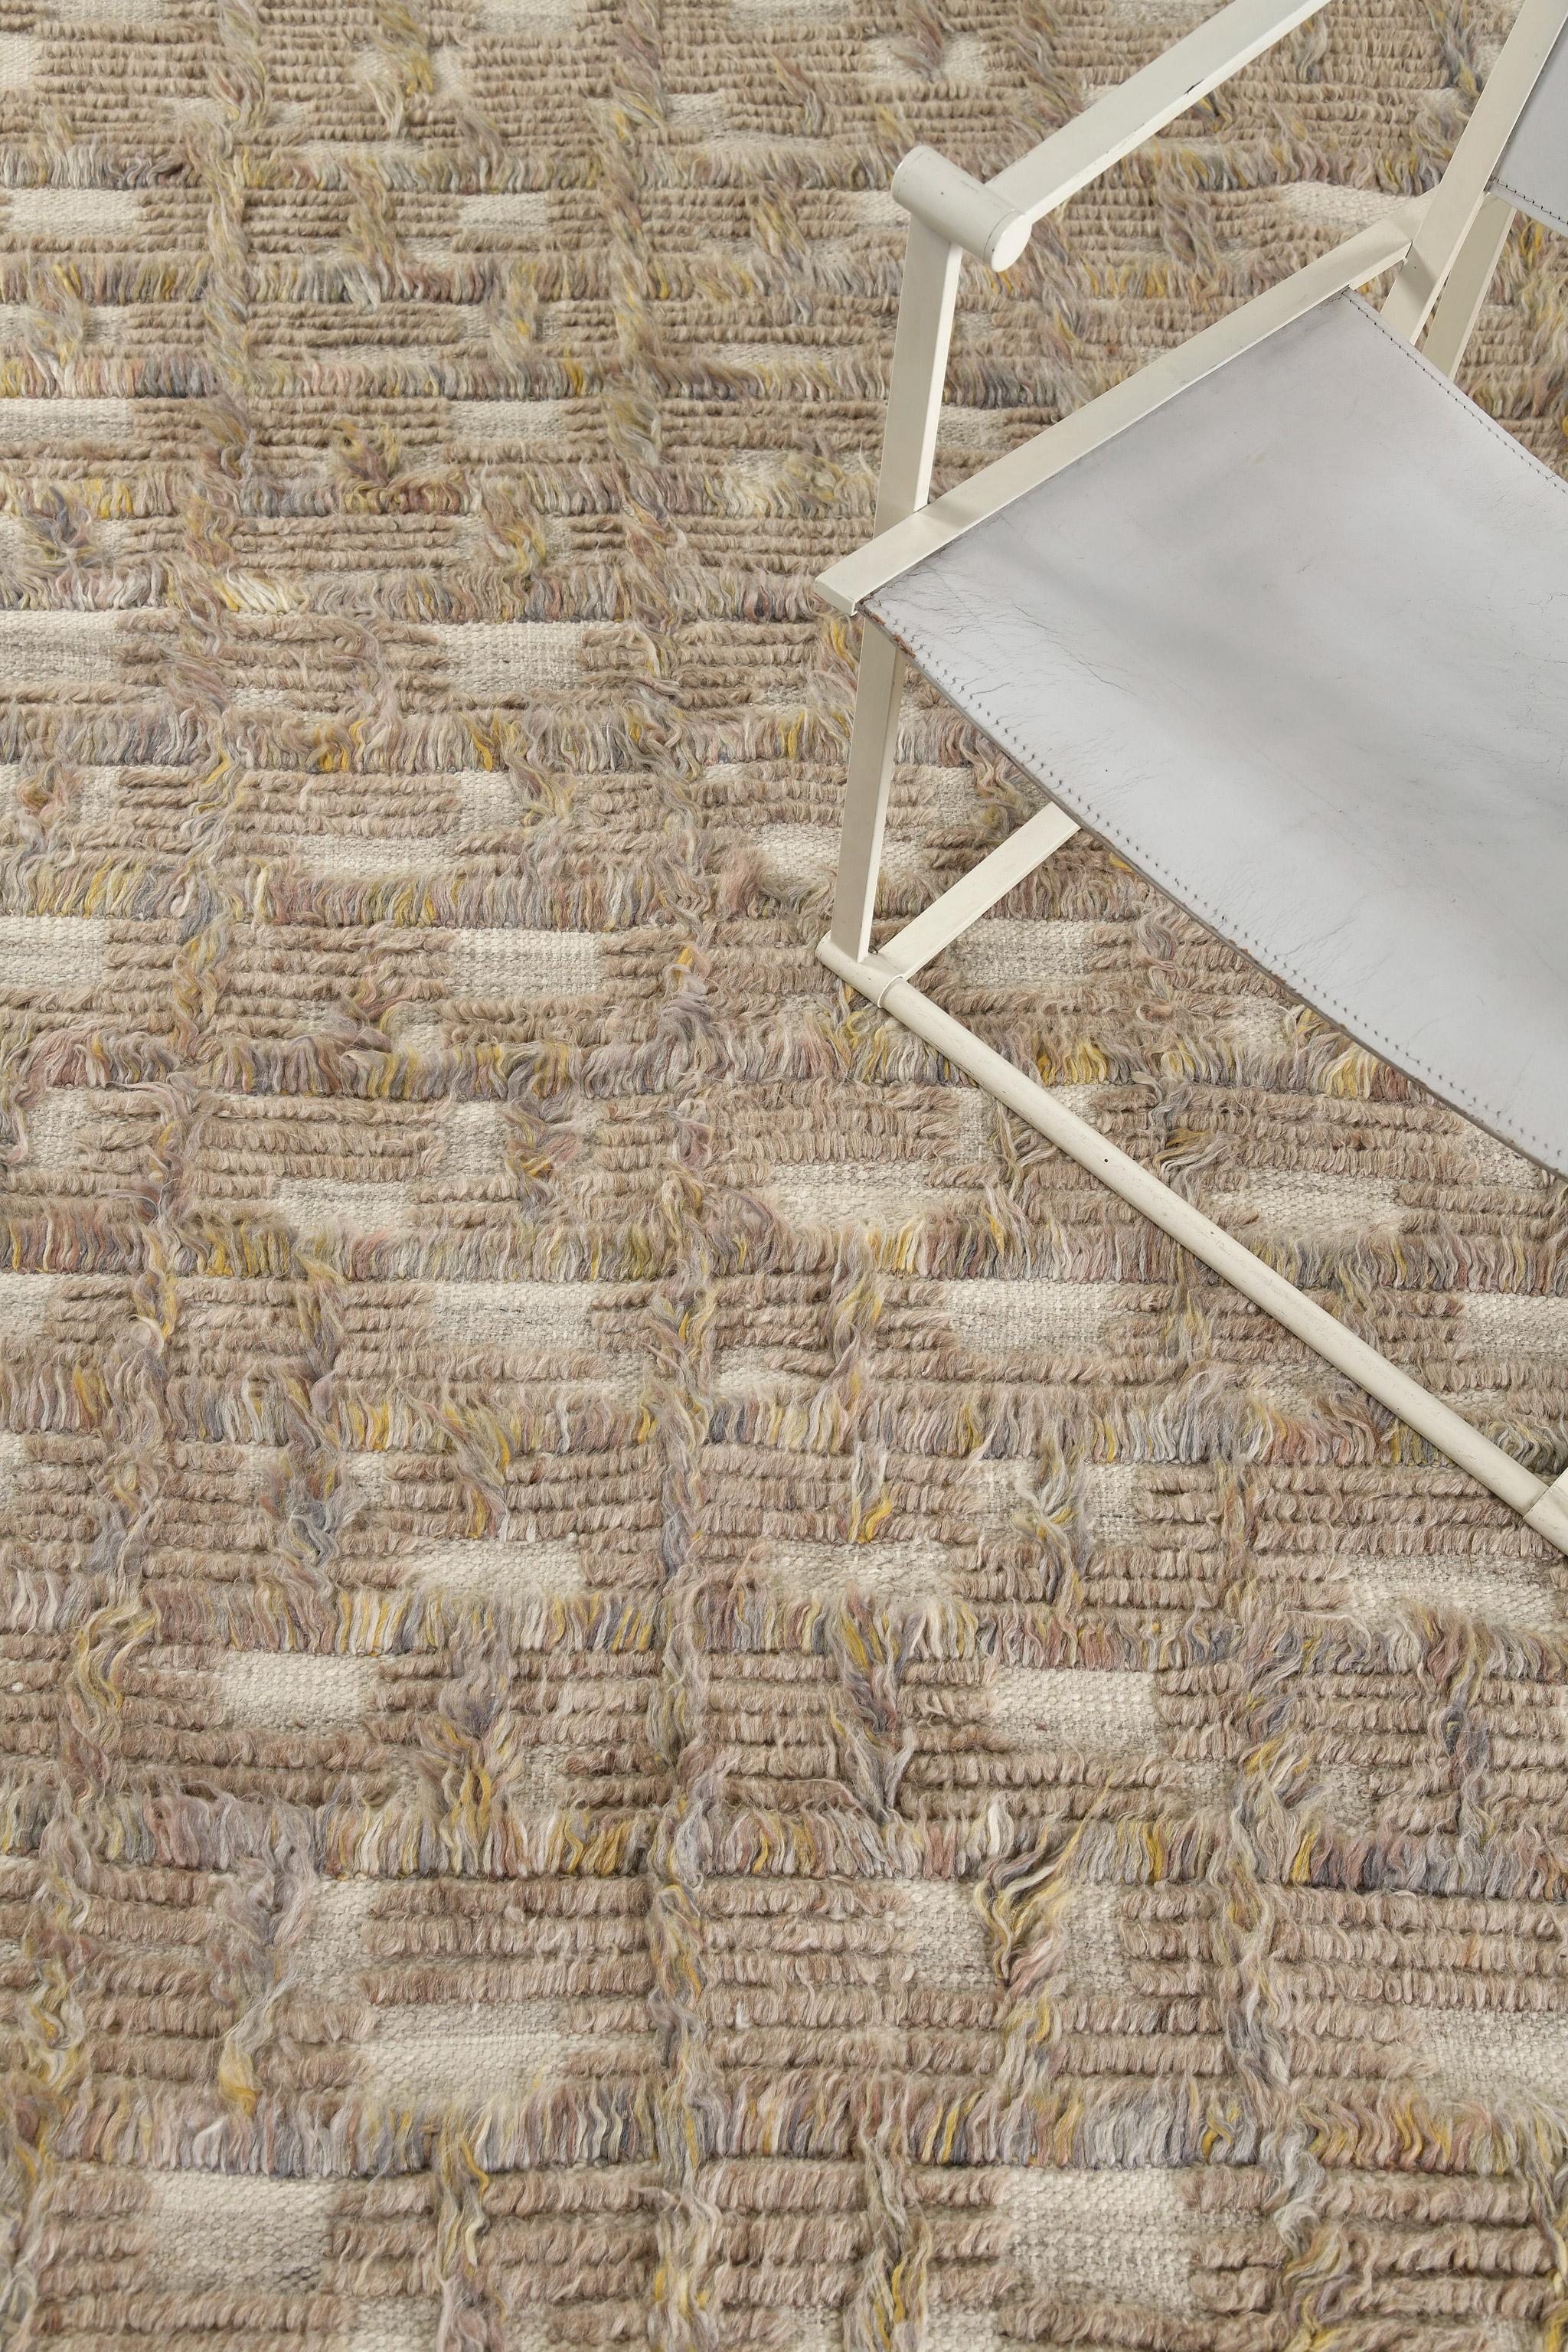 Imana is an intricate syncopated motif of long and short pile punctuated by squares of open flatweave in banded tones. Imana is available in two colorways, with custom options available. This piece features heathered clay-taupe colors, with dappled